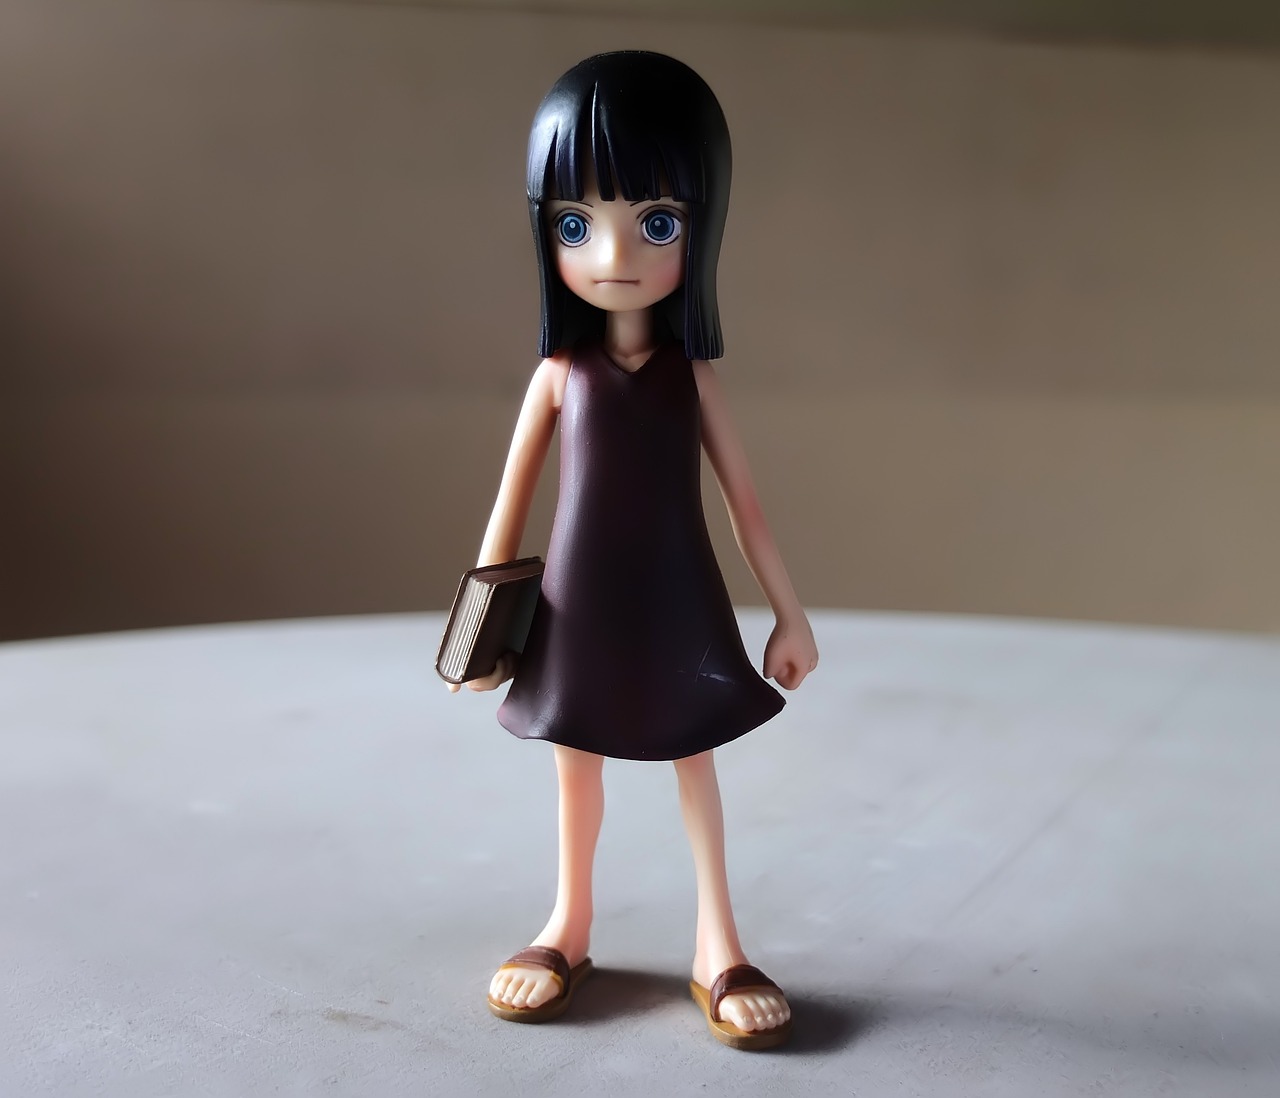 a close up of a doll on a table, a picture, inspired by Eiichiro Oda, fullbody photo, airbrush dark dress, with straight black hair, full body photo